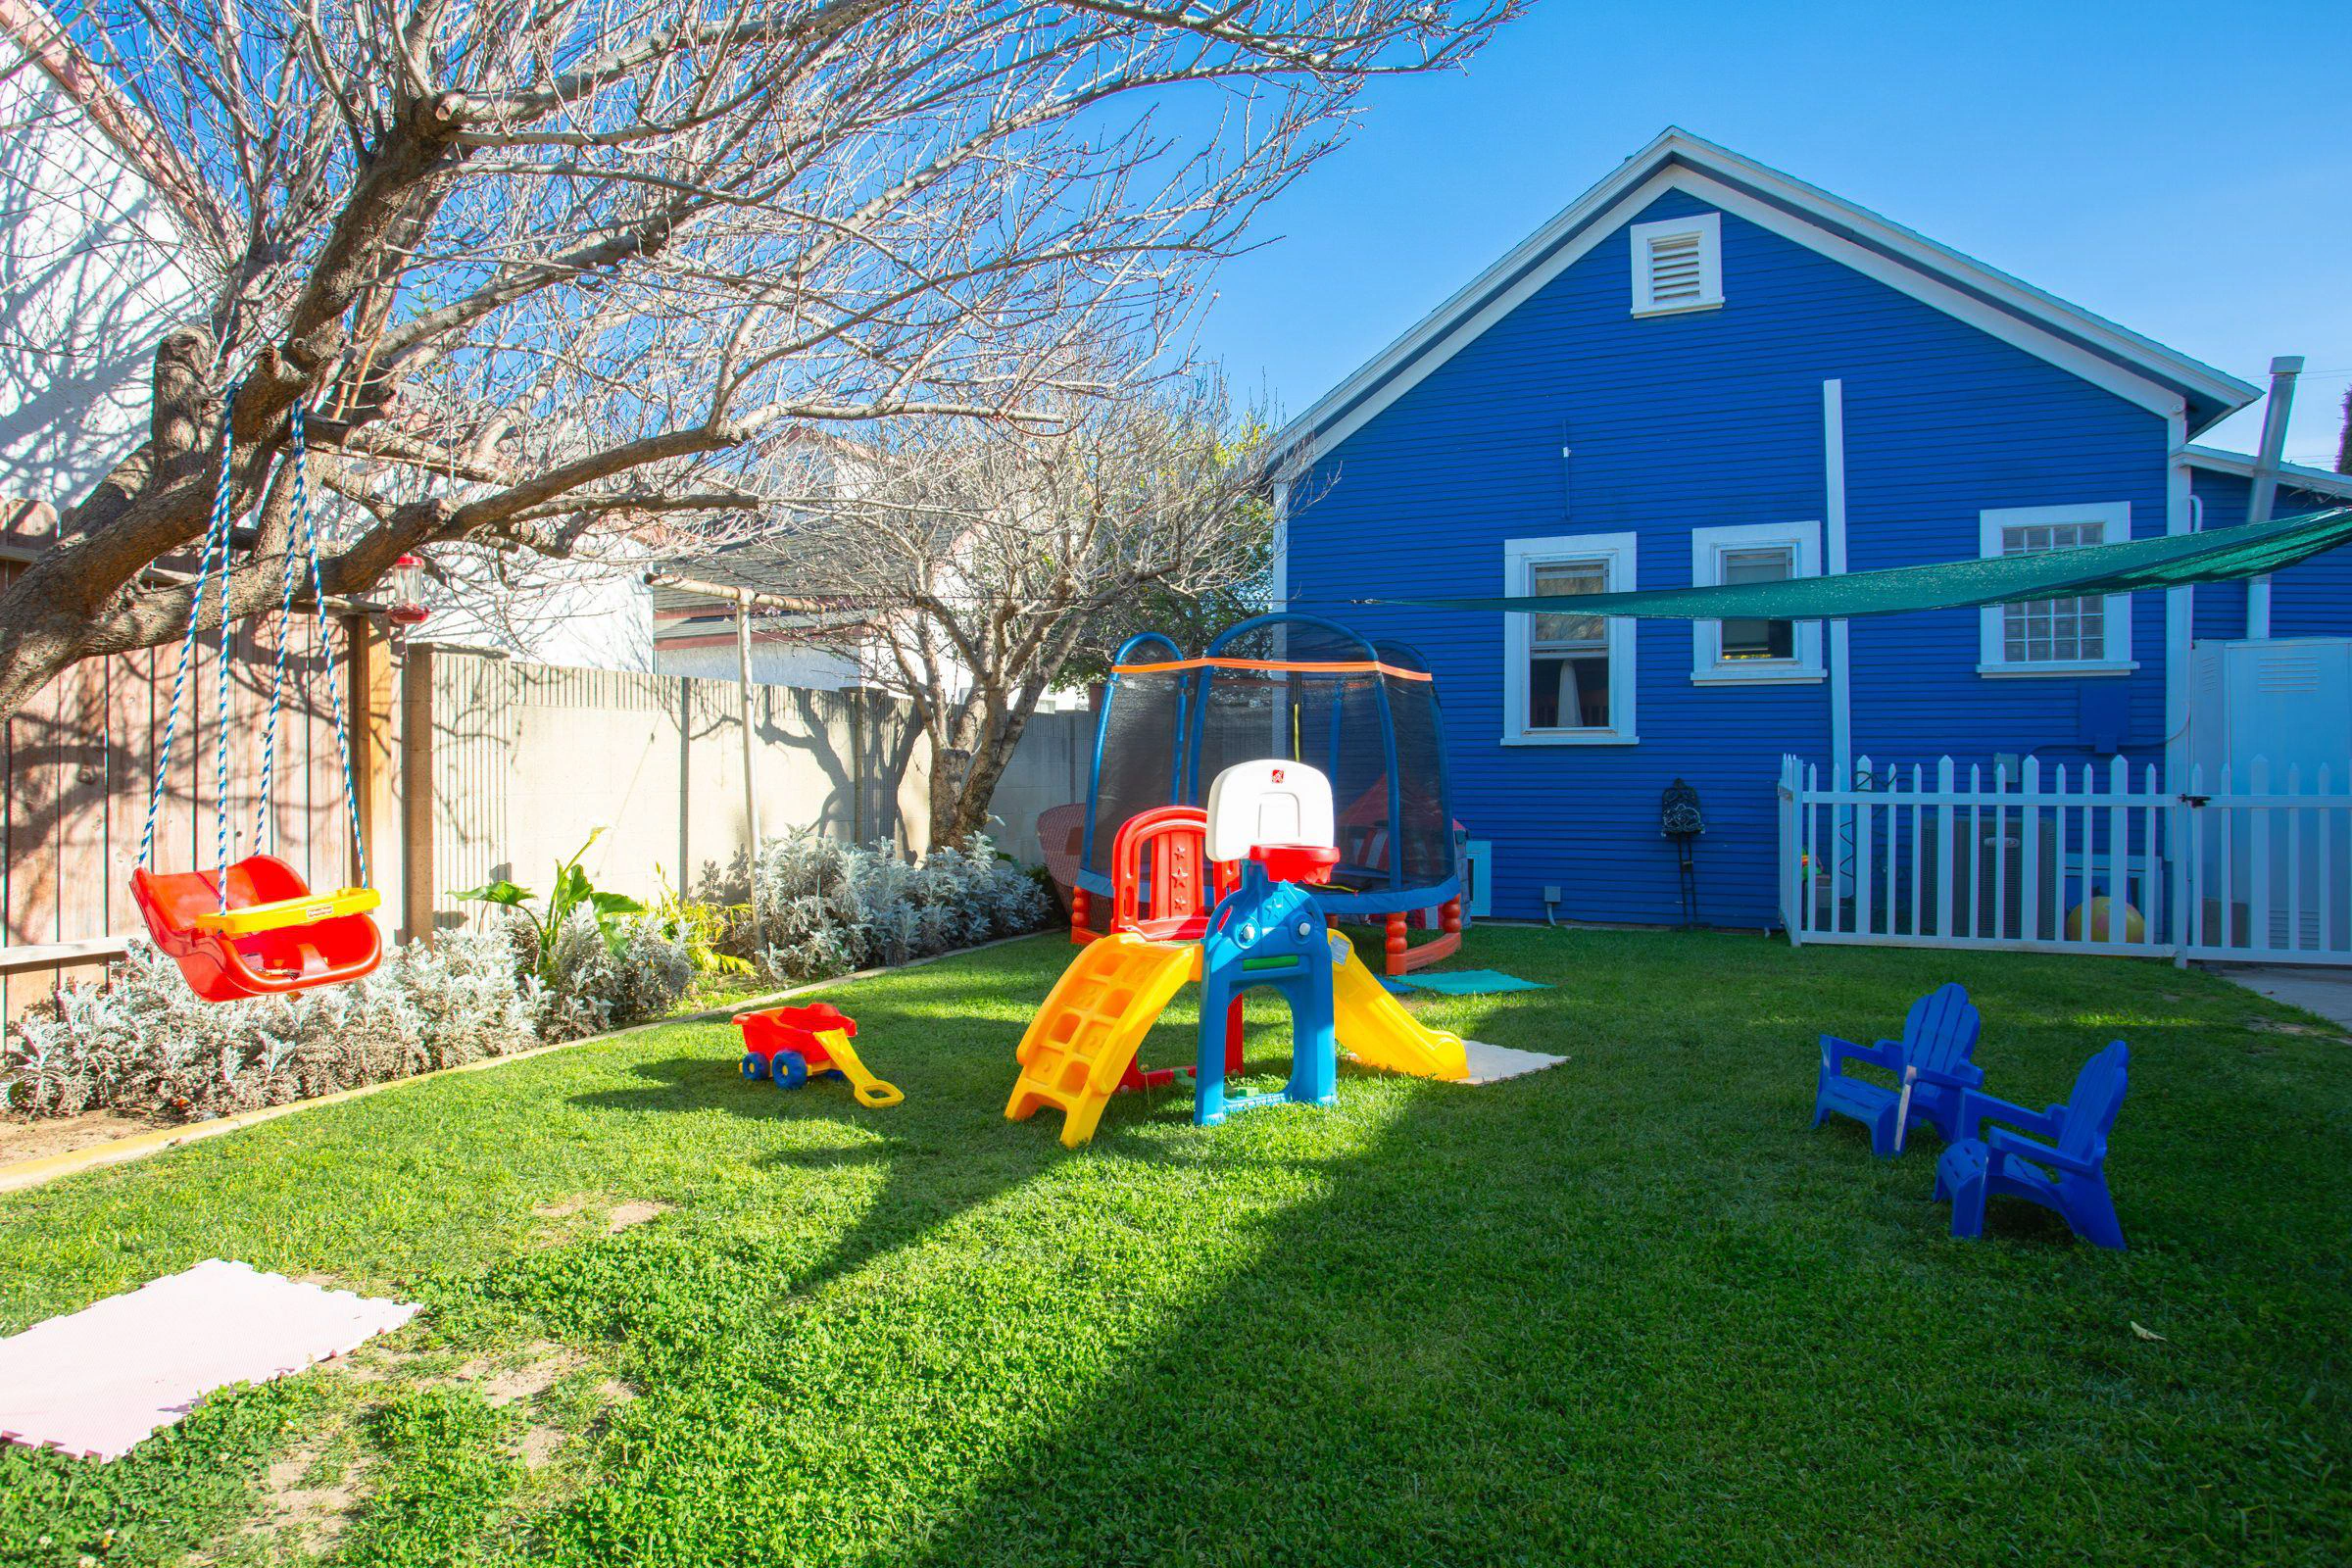 A typical WeeCare daycare provides home-based familiarity for kids, combining early childhood curriculum and play elements for the best childcare environment.